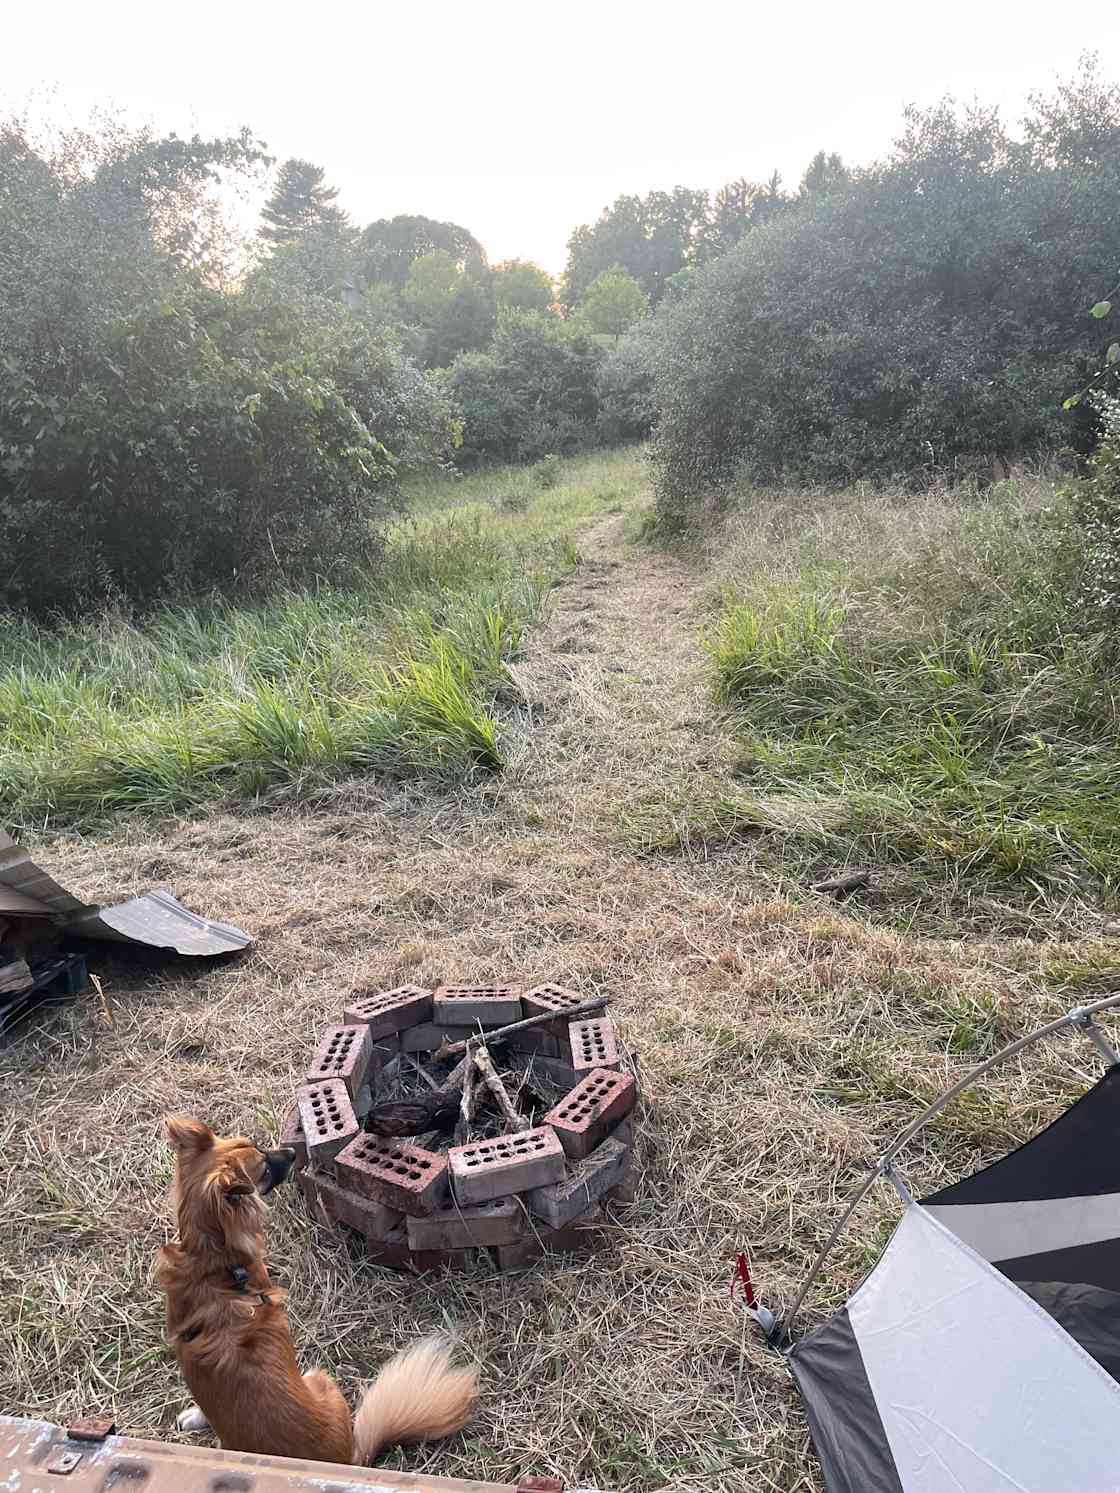 Itchy/spiky dry vegetation, most level tent spot was RIGHT next to the fire pit